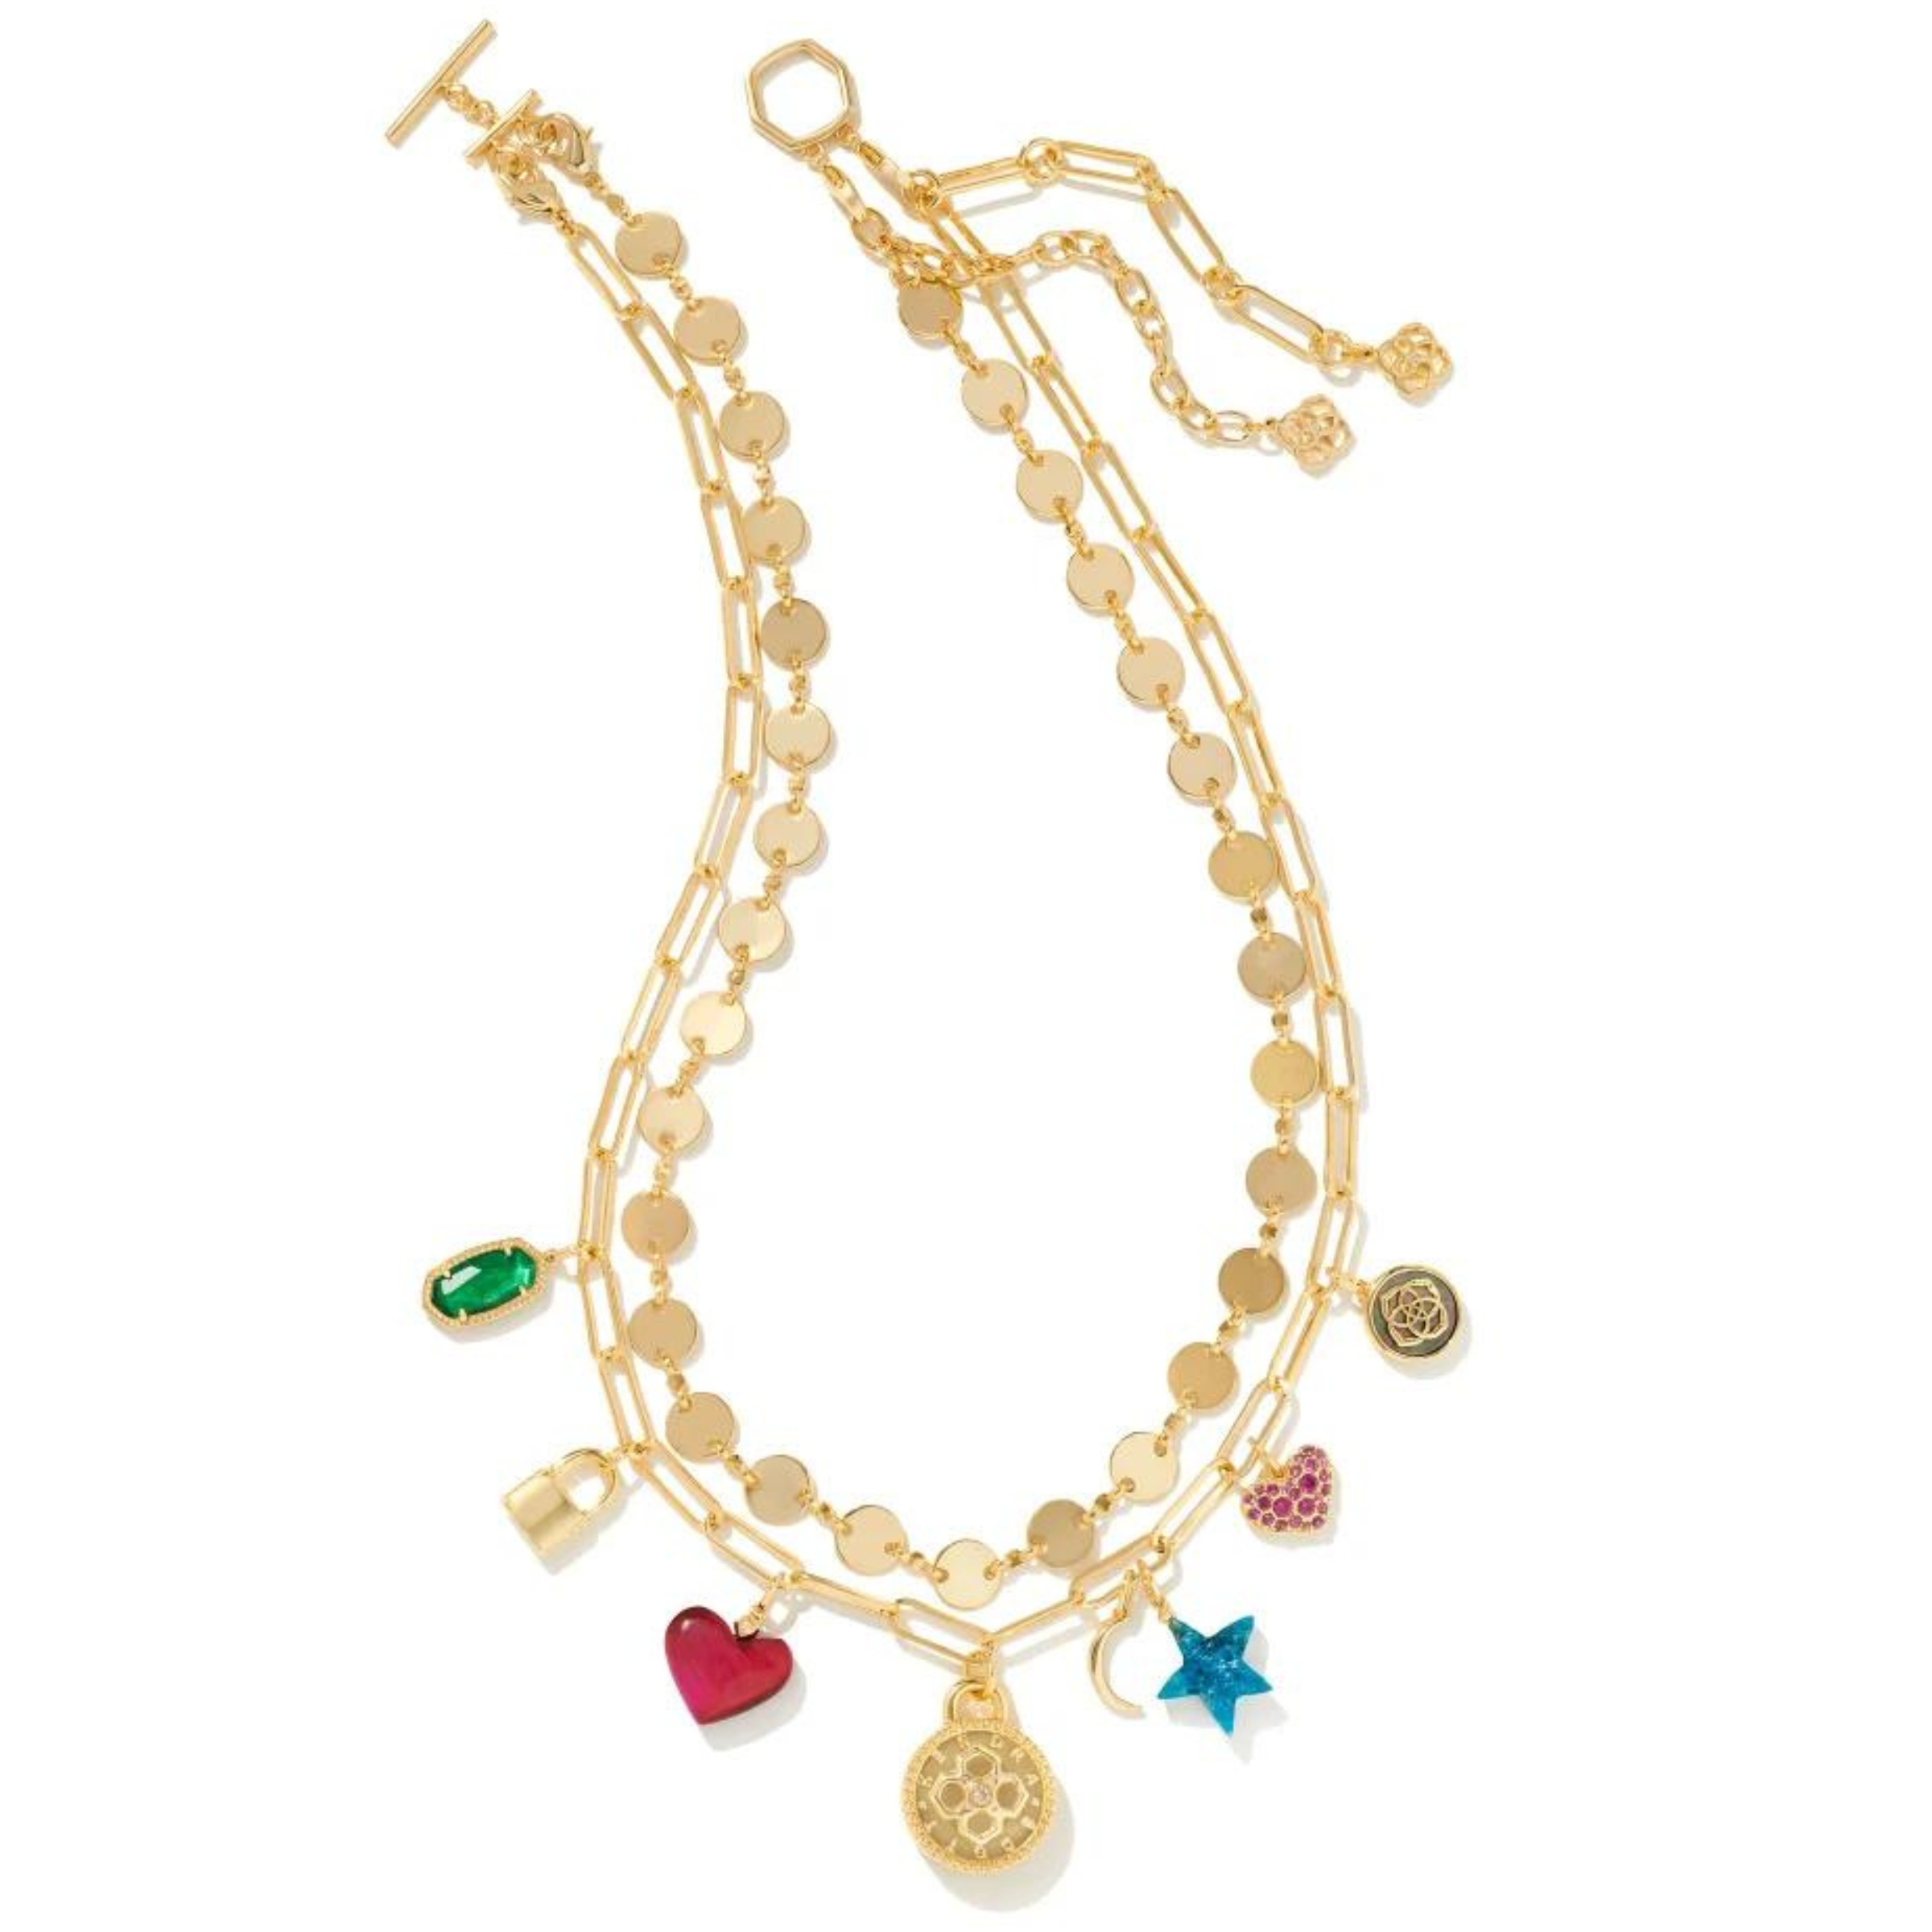 Double layered gold necklace. One layer has multicolored charms in different designs. These charms include a green oval, gold lock, pink heart, blue star, blue moon, and pink crystal heart. This necklace is pictured on a white background. 